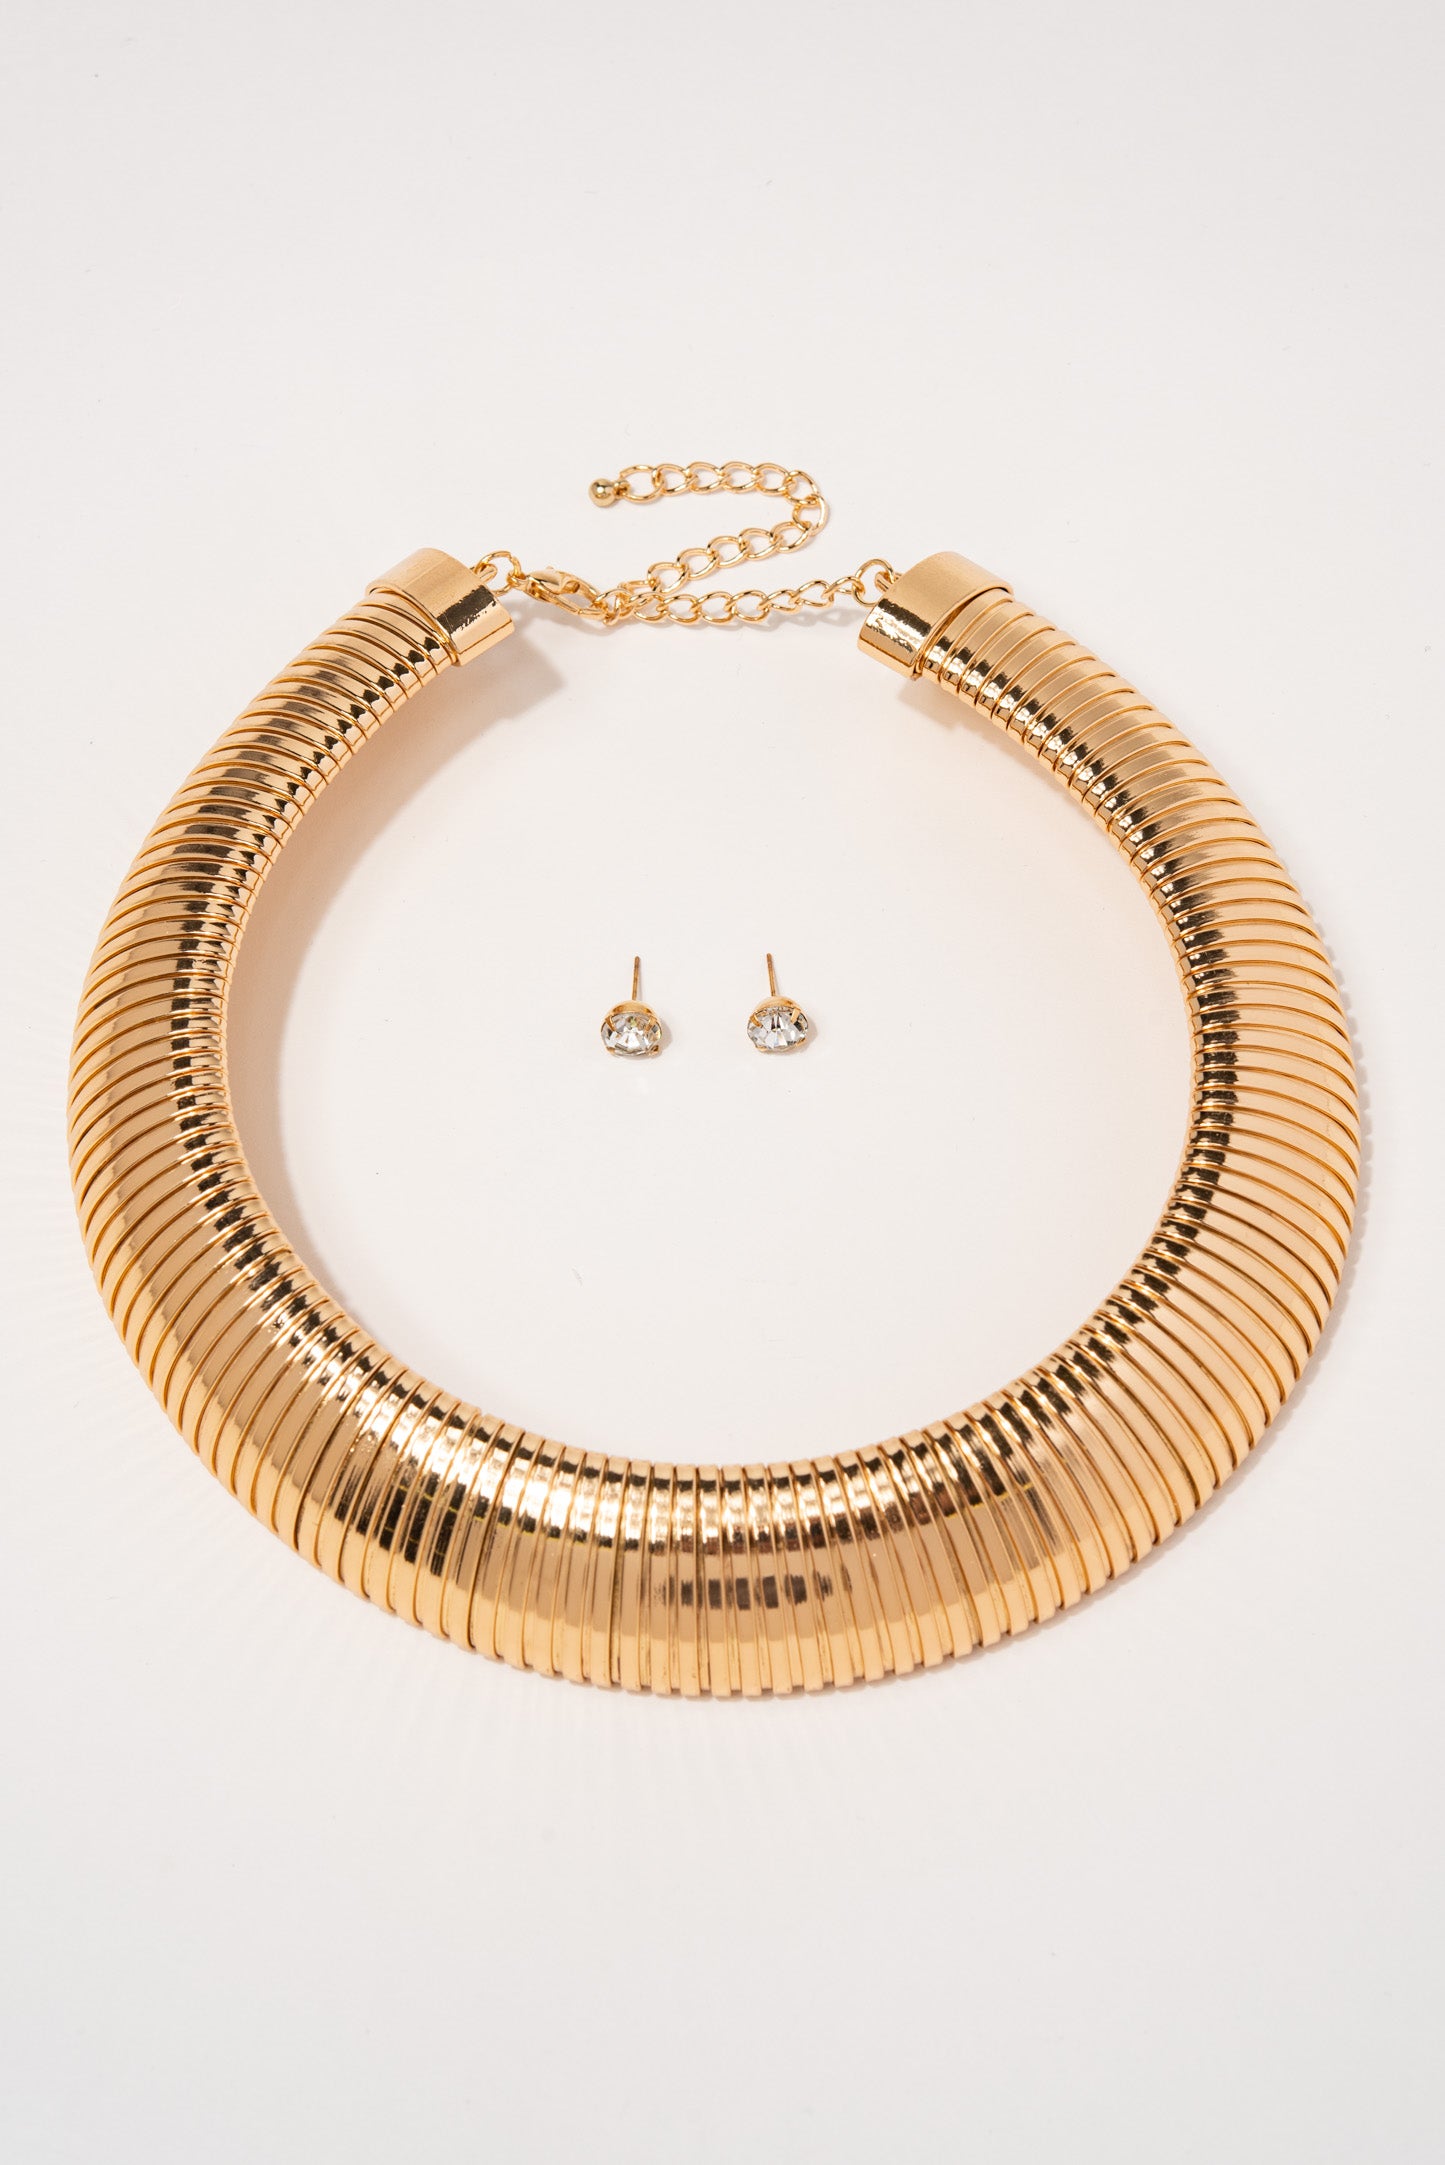 Stacy Bauble Bar Collar Necklace Earring Set - Gold